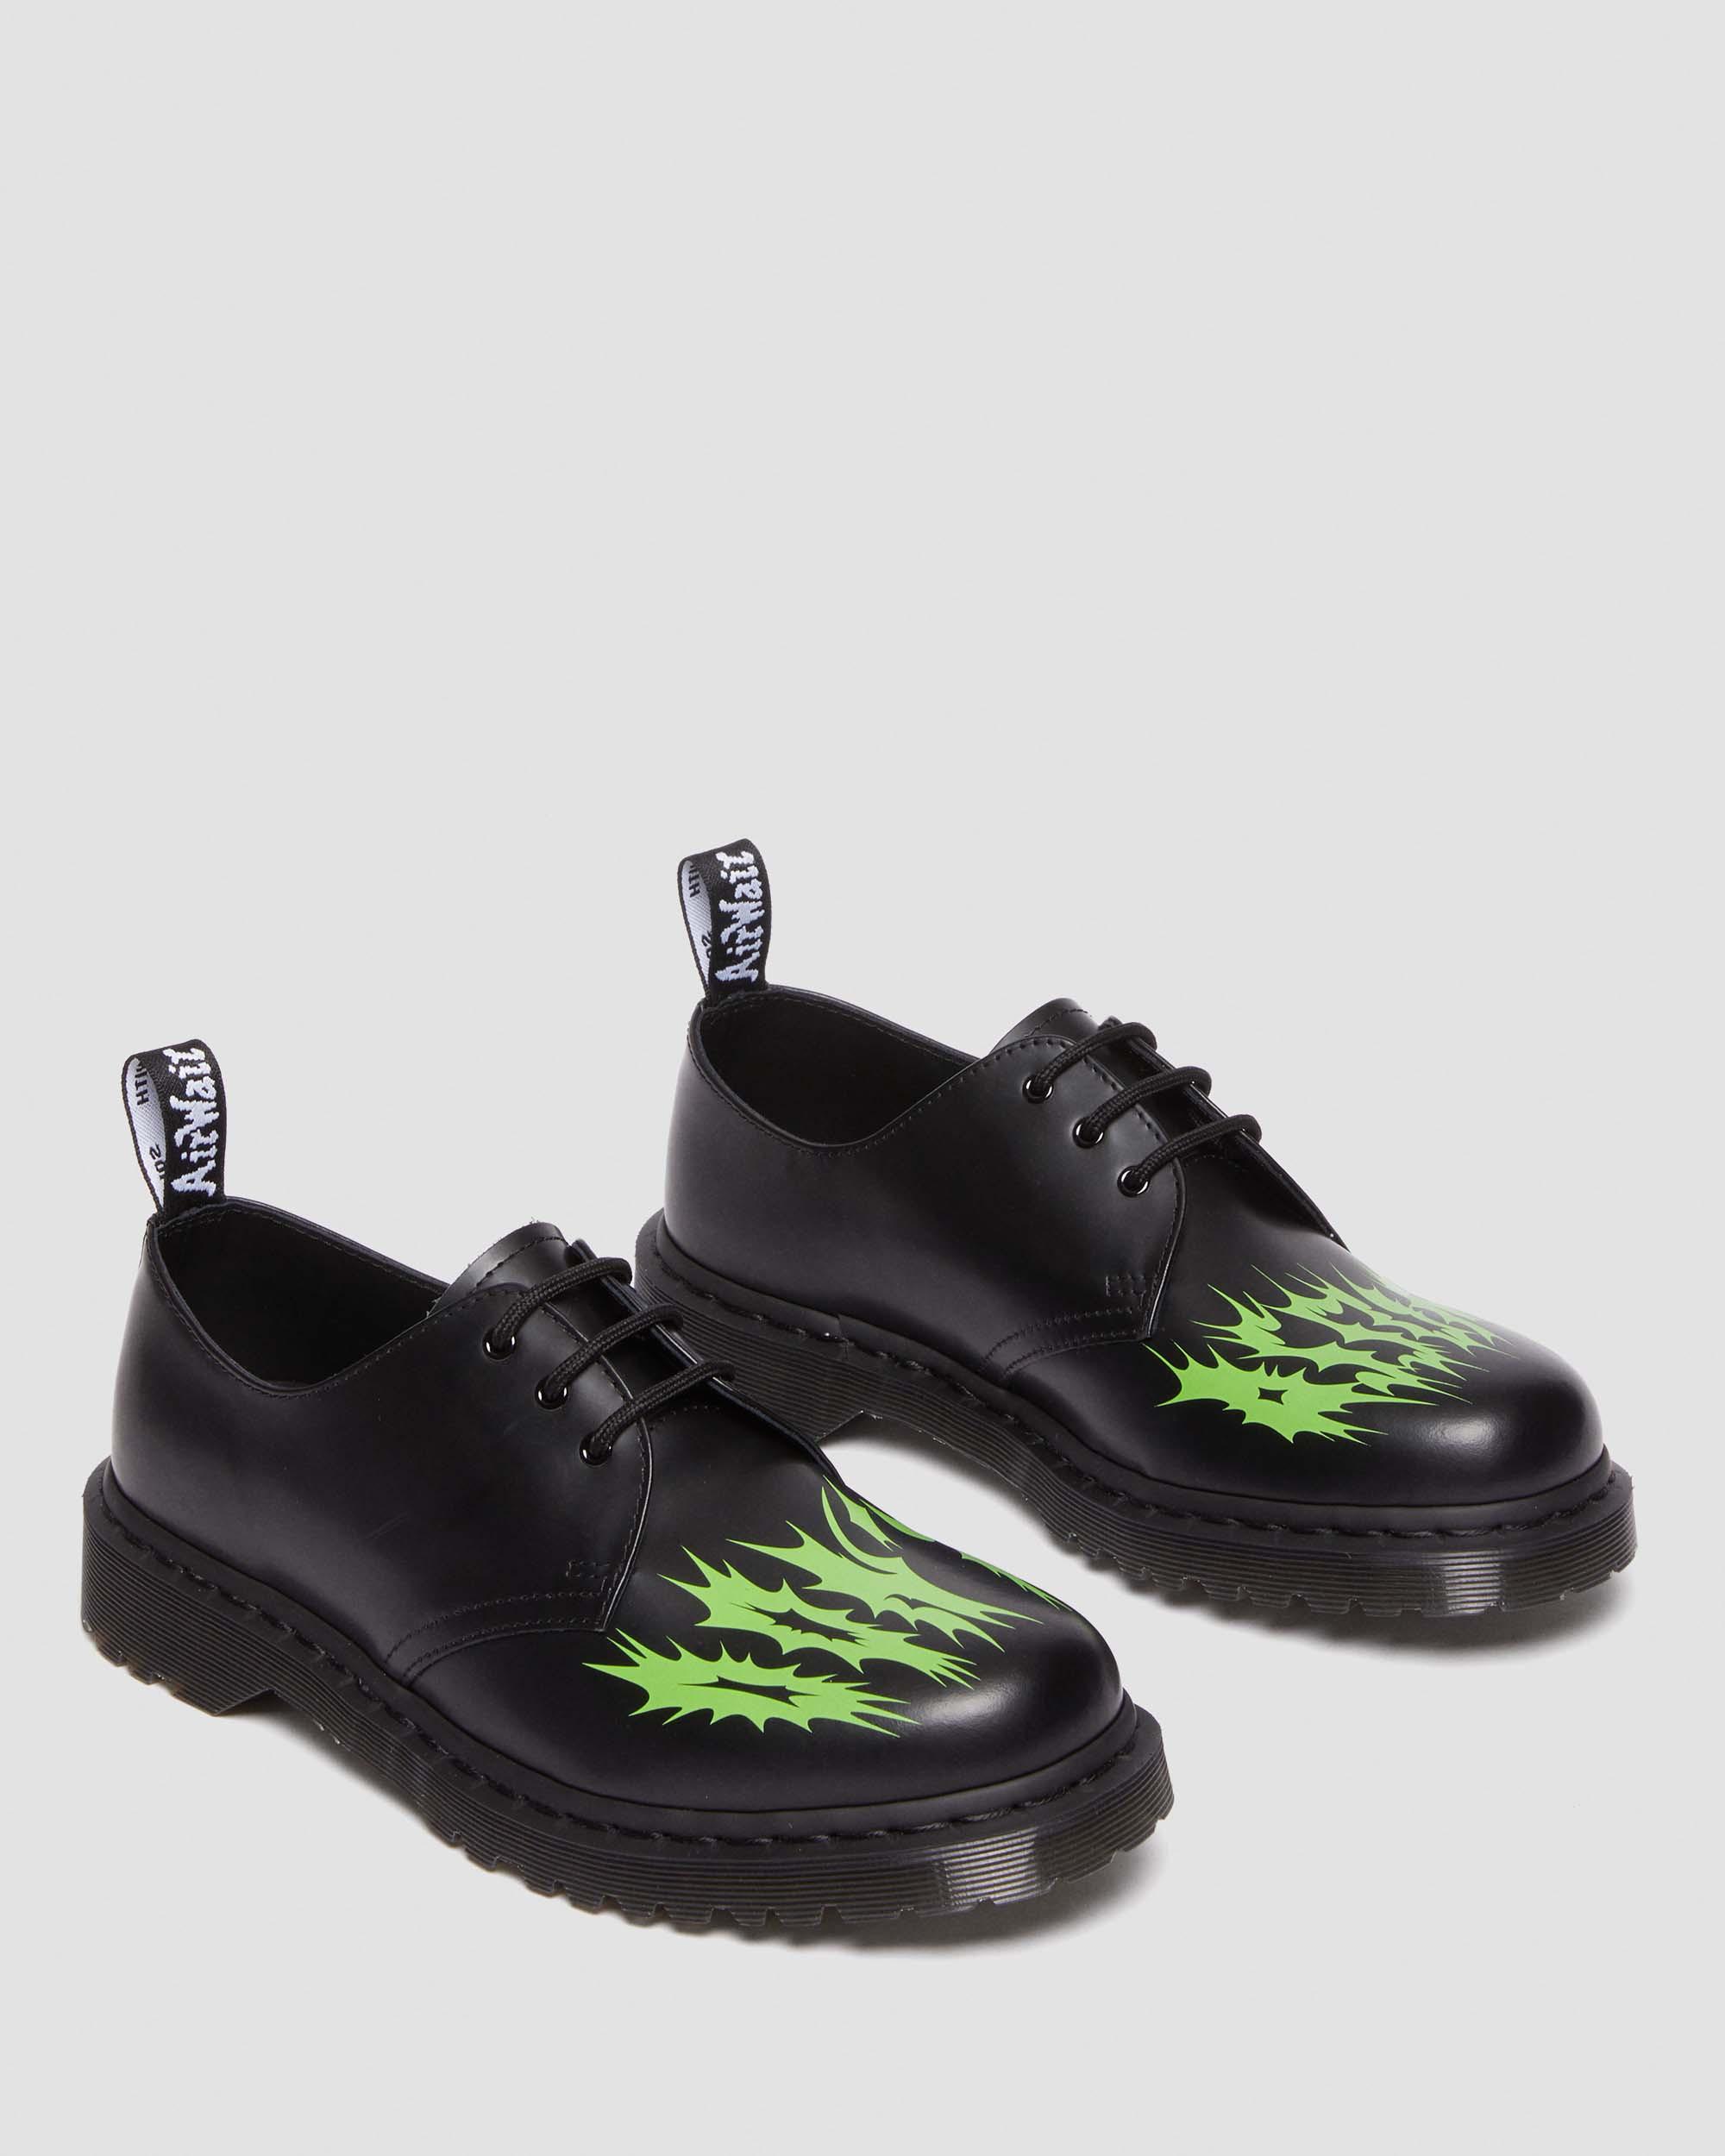 1461 NTS Leather Shoes in Black+Green